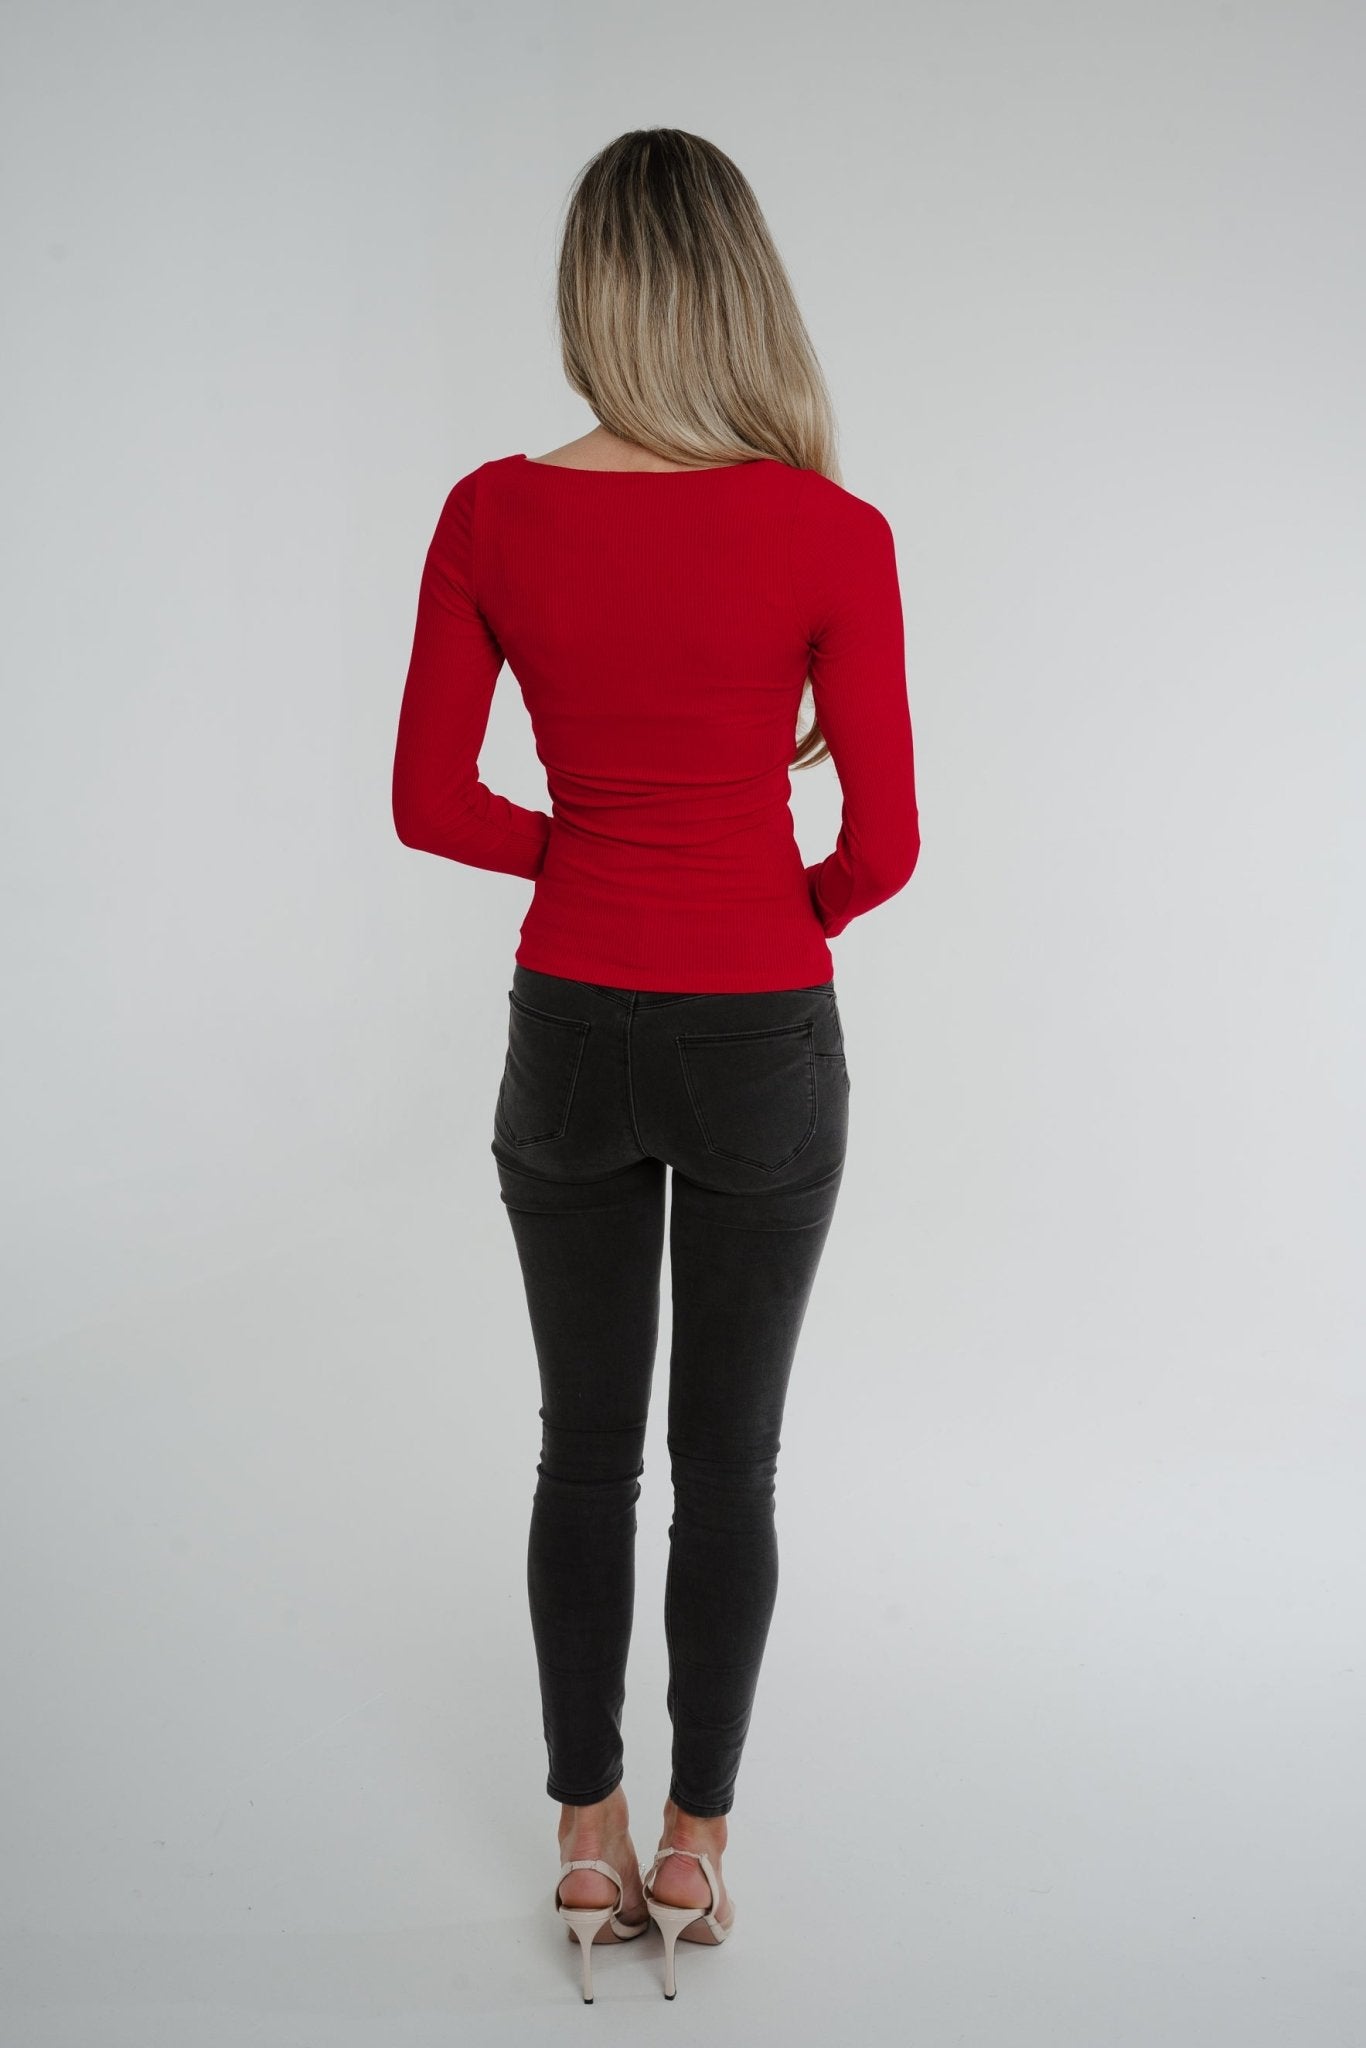 Taylor Square Neck Top In Red - The Walk in Wardrobe